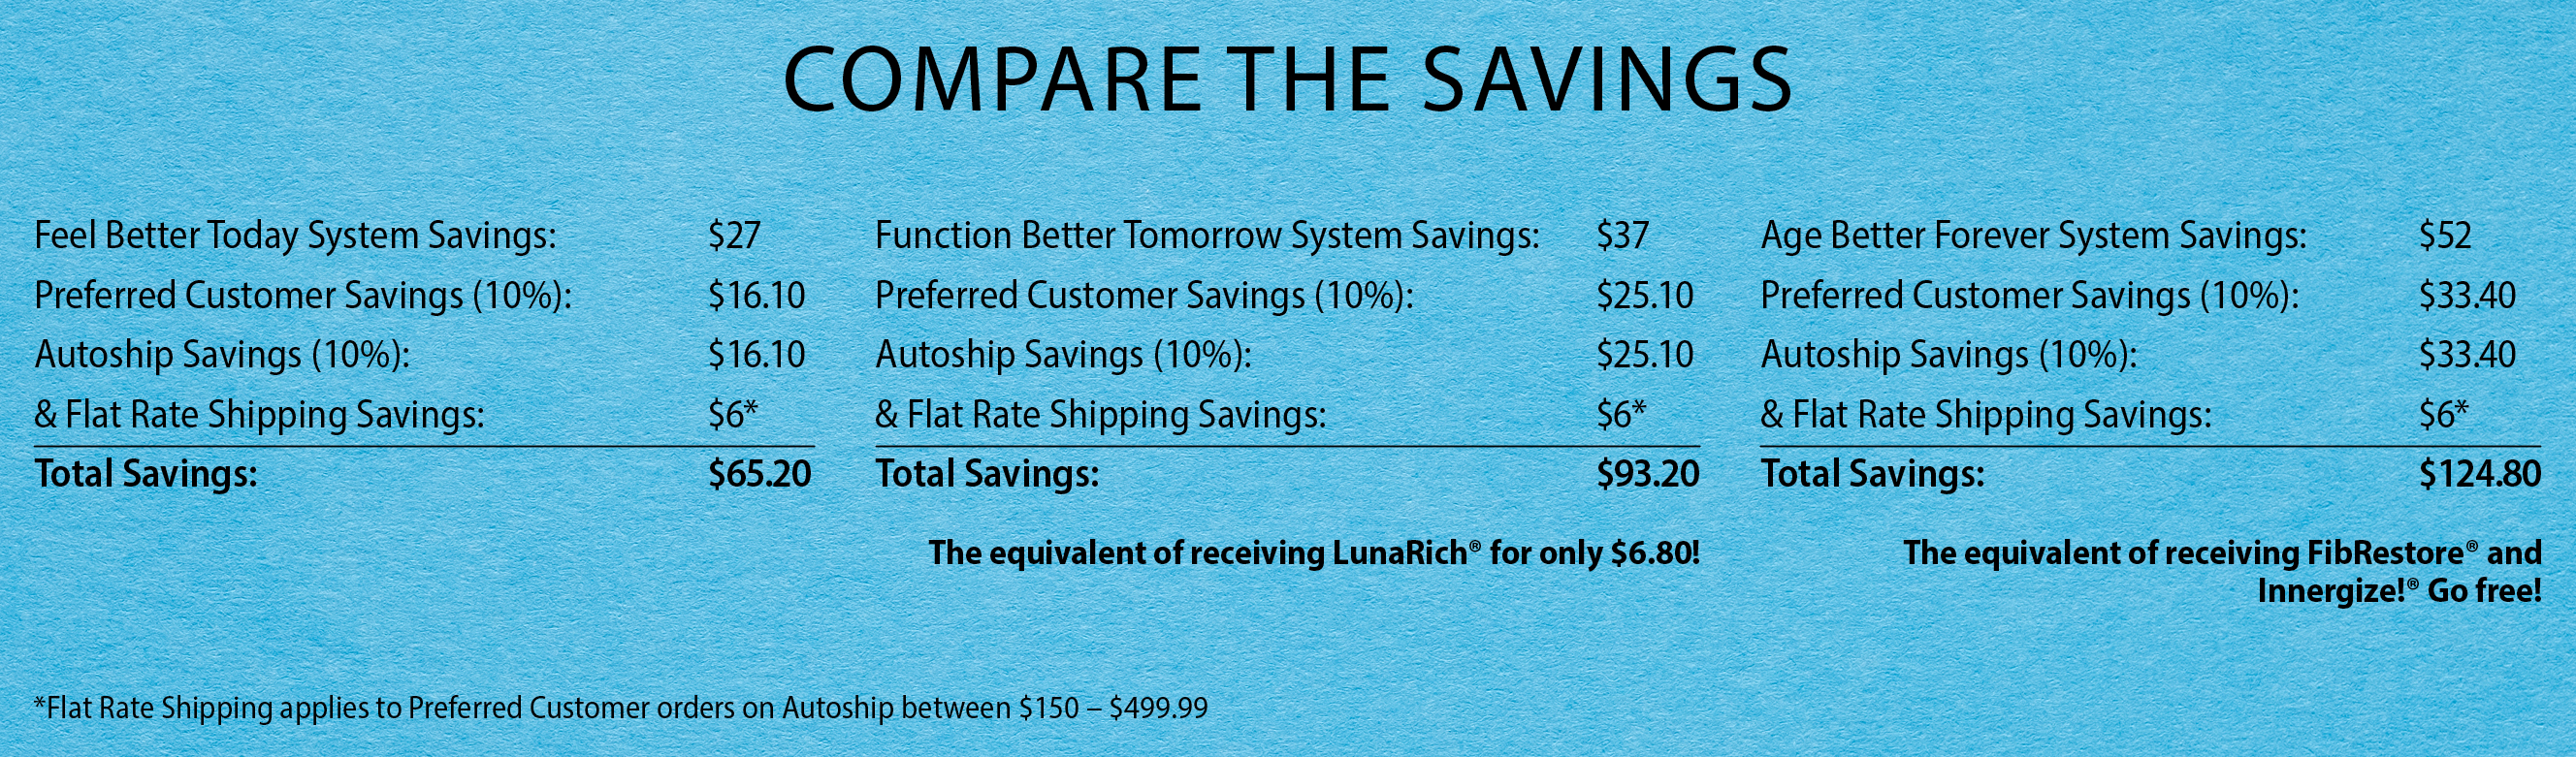 Savings comparison chart of the three Healthy Aging Systems